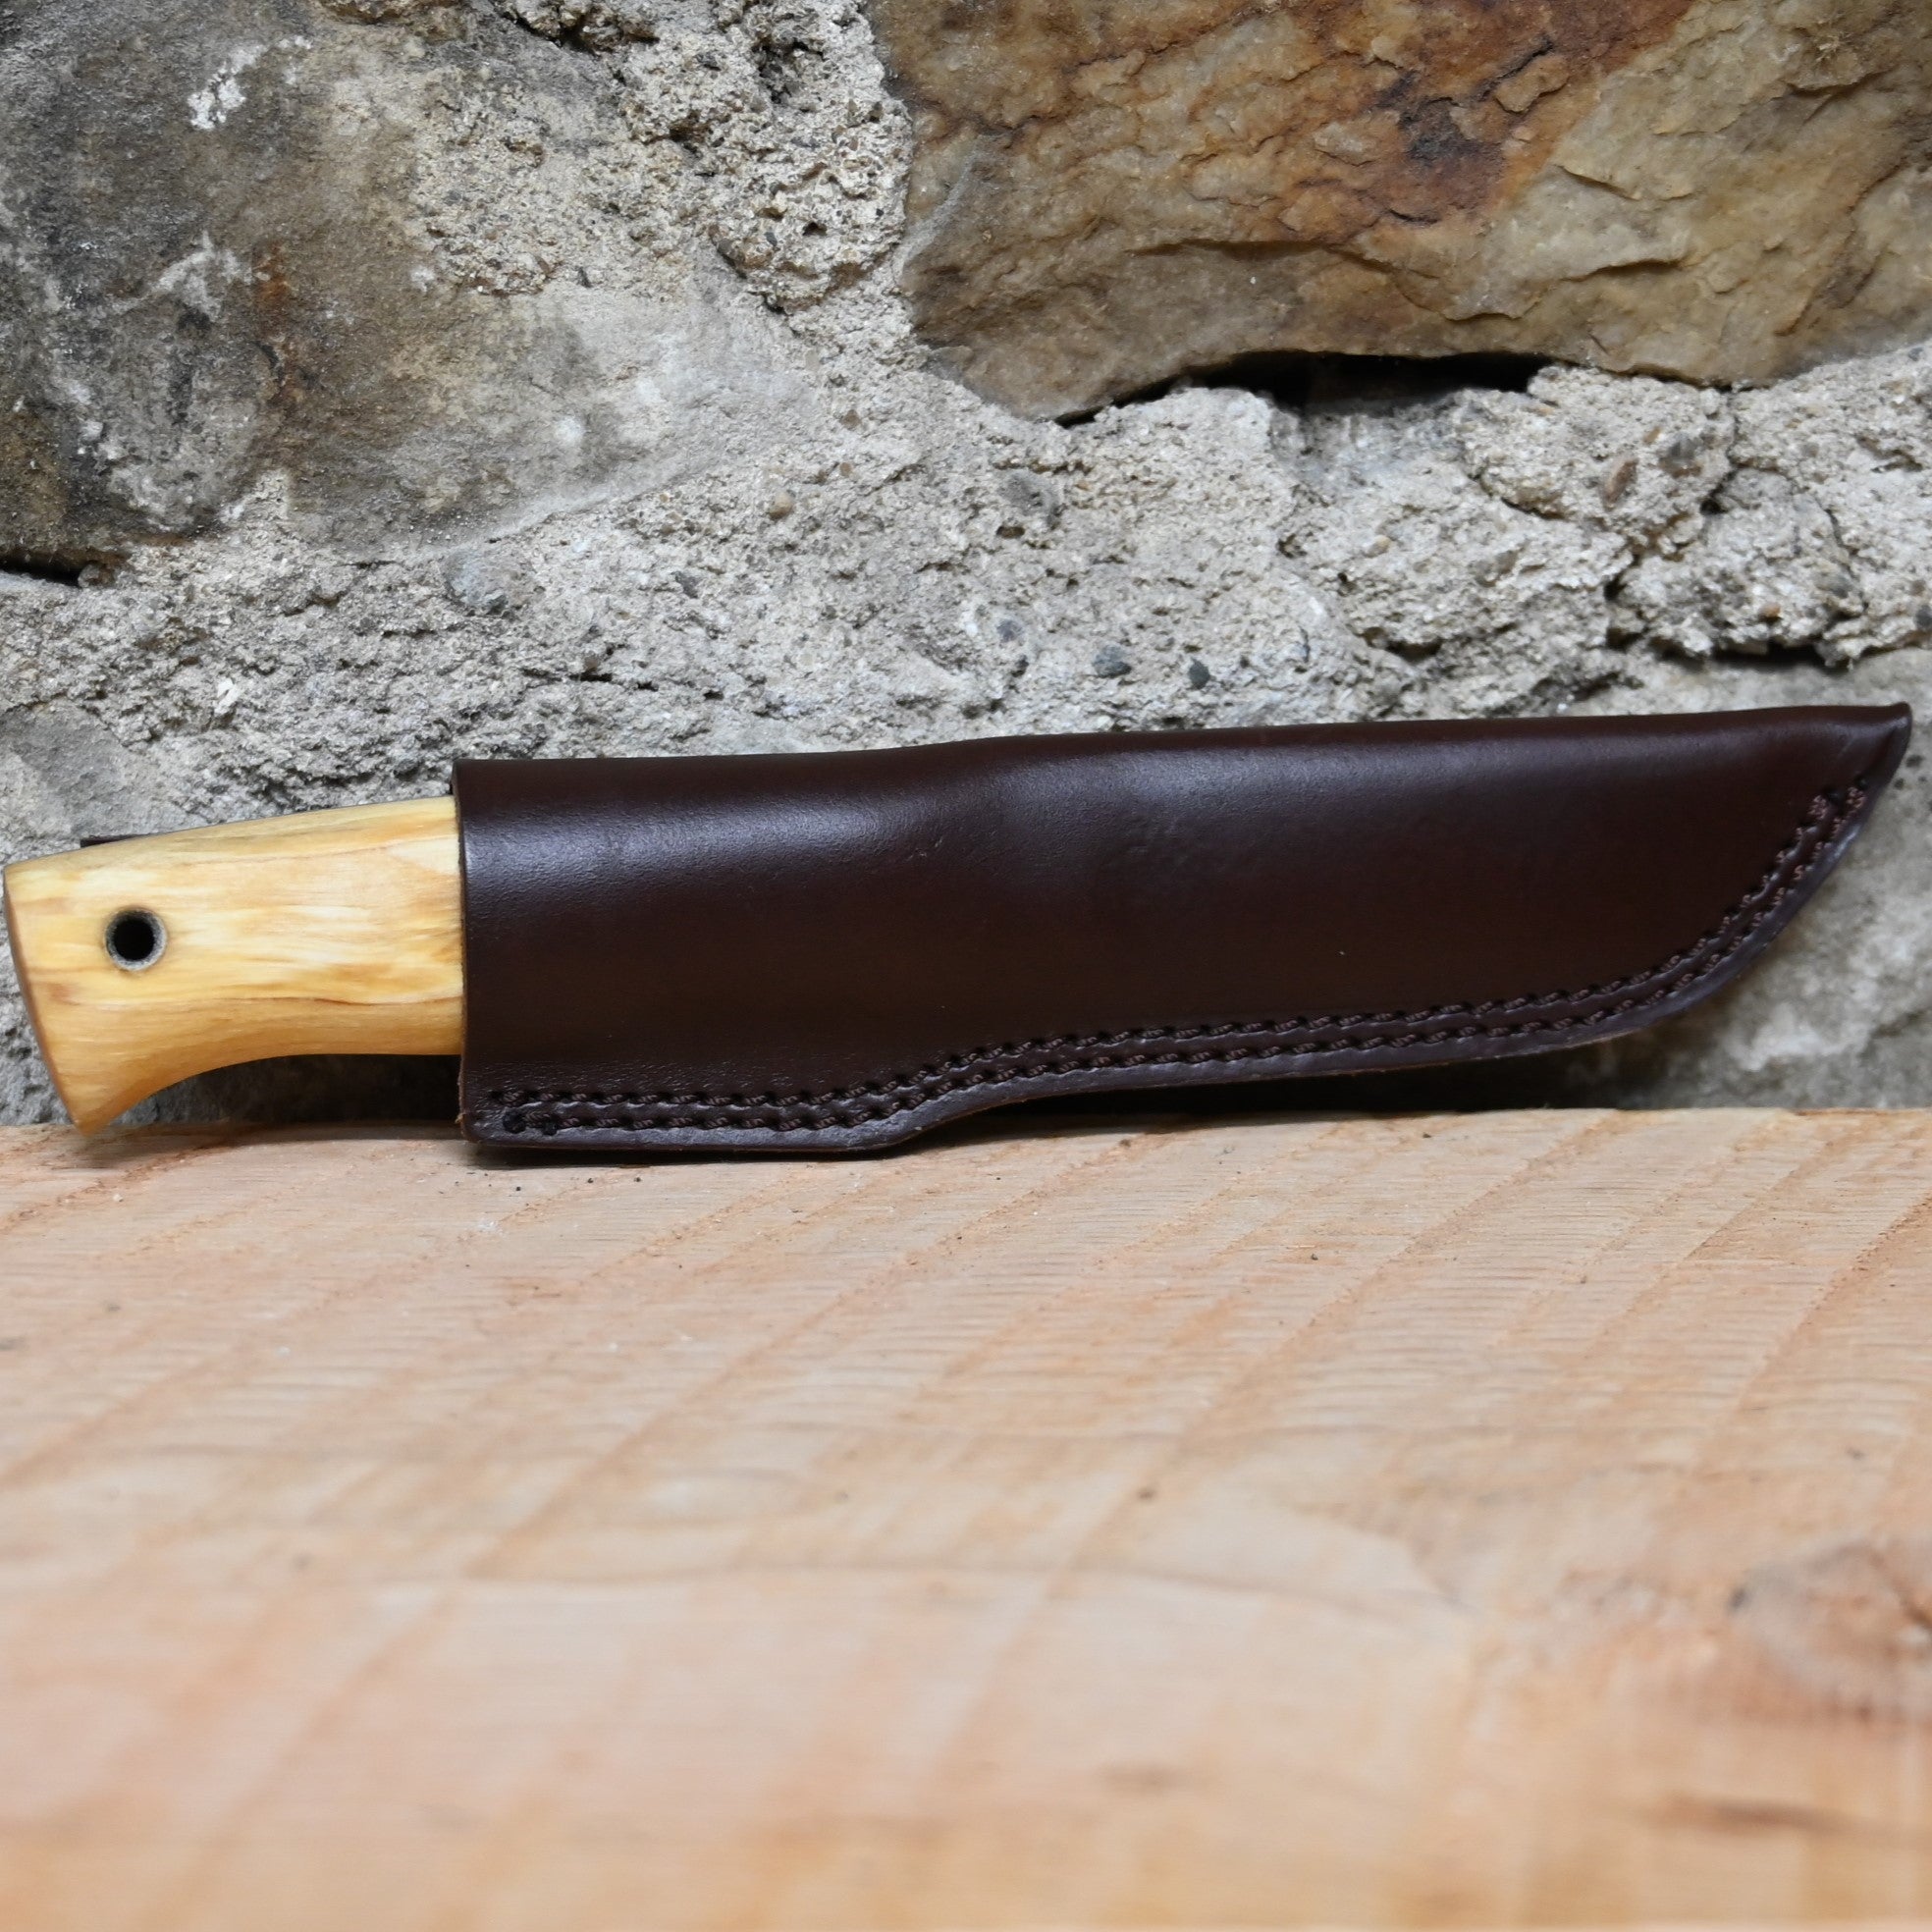 Helle Temagami Carbon Steel Knife view of sheath